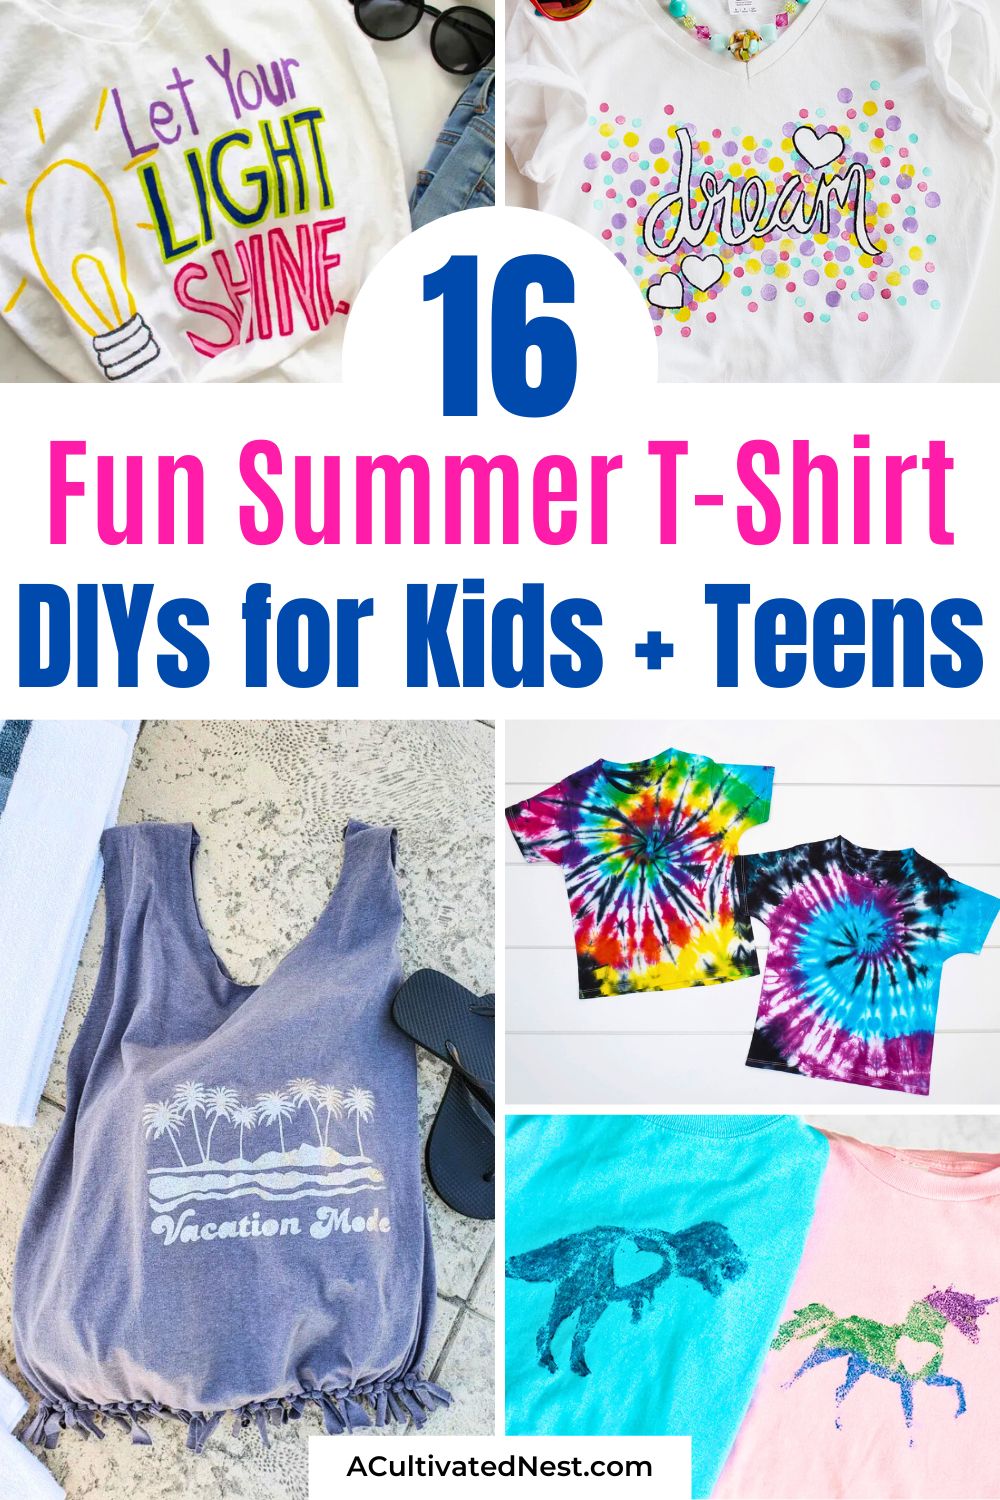 16 Fun Summer T-Shirt Crafts for Kids and Teens- Looking for fun summer activities? Try these awesome T-shirt crafts for kids and teens! Easy and creative projects that turn plain tees into wearable art. Explore the ideas now and get crafting! | #SummerDIY #TShirtCrafts #KidsCrafts #teenDIYs #ACultivatedNest